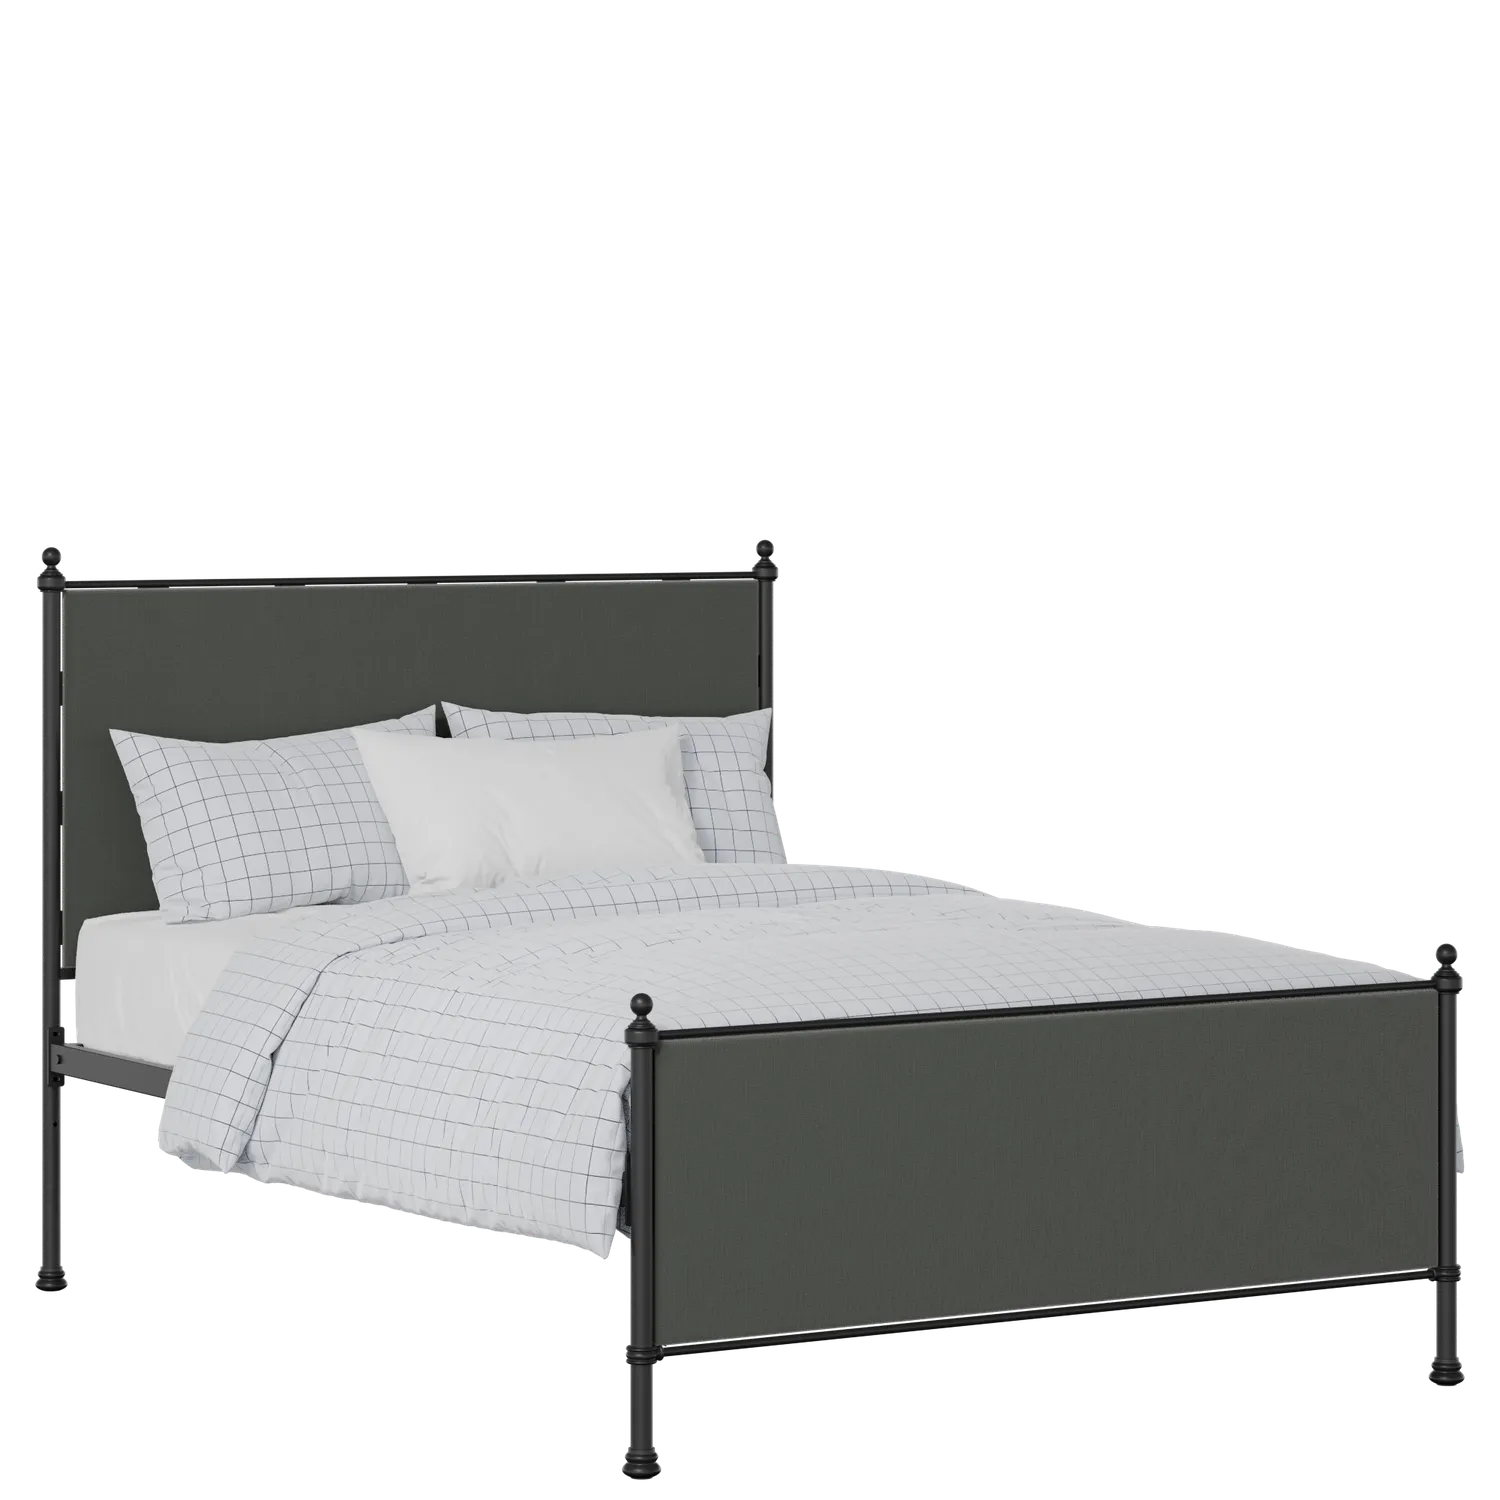 Neville iron/metal upholstered bed in black with iron fabric